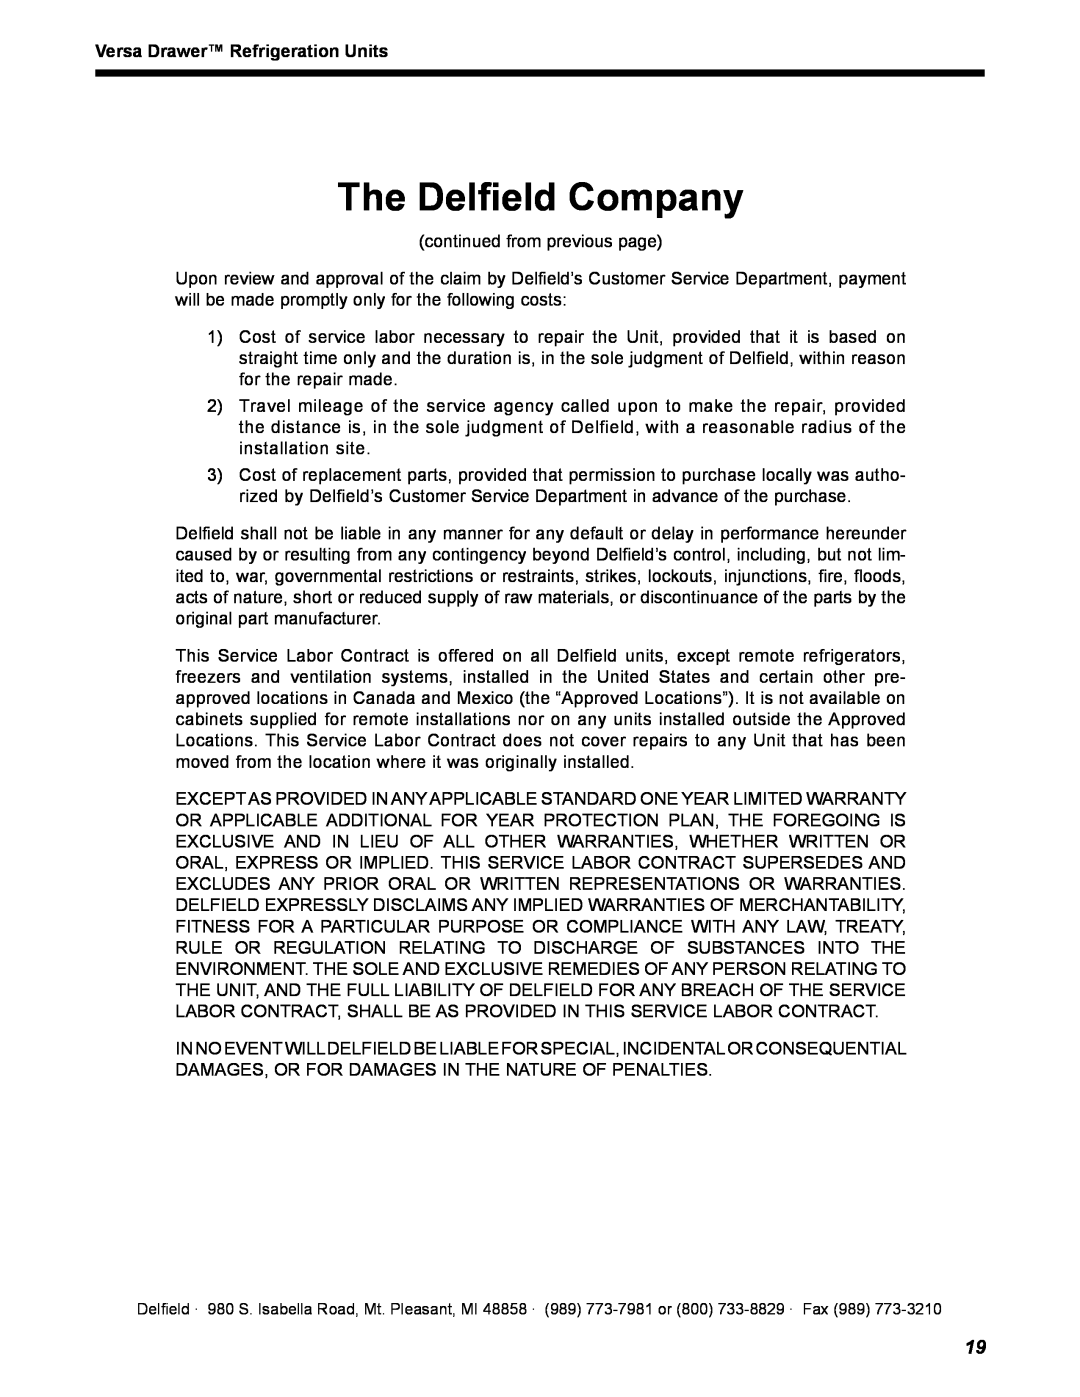 Delfield 18600VD manual The Delfield Company, Versa Drawer Refrigeration Units, continued from previous page 